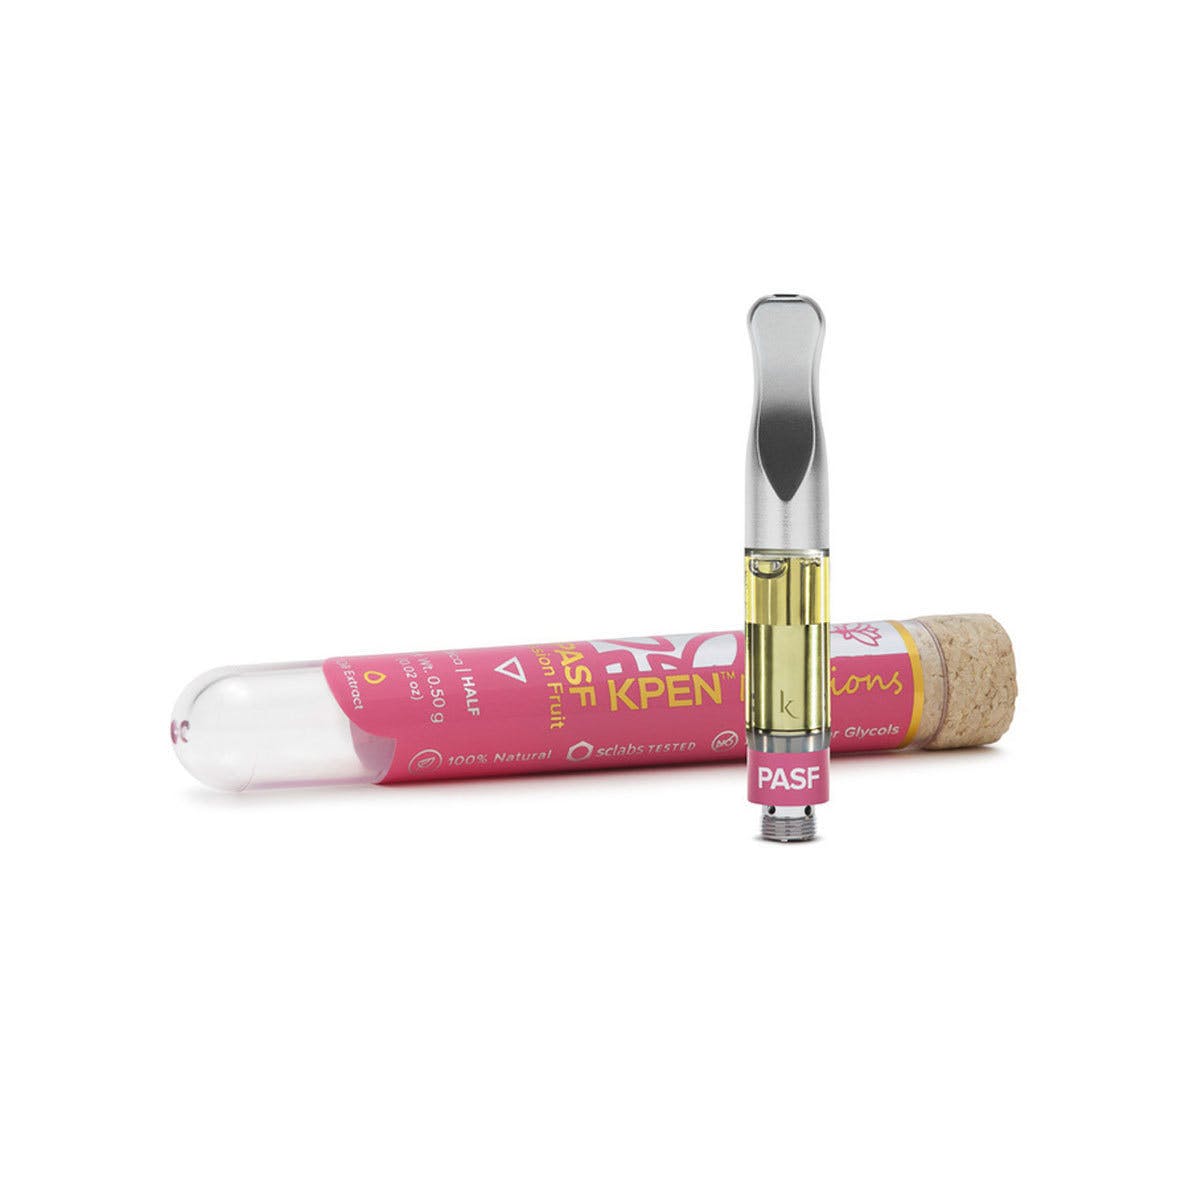 KPEN v2 Infusions - Passion Fruit